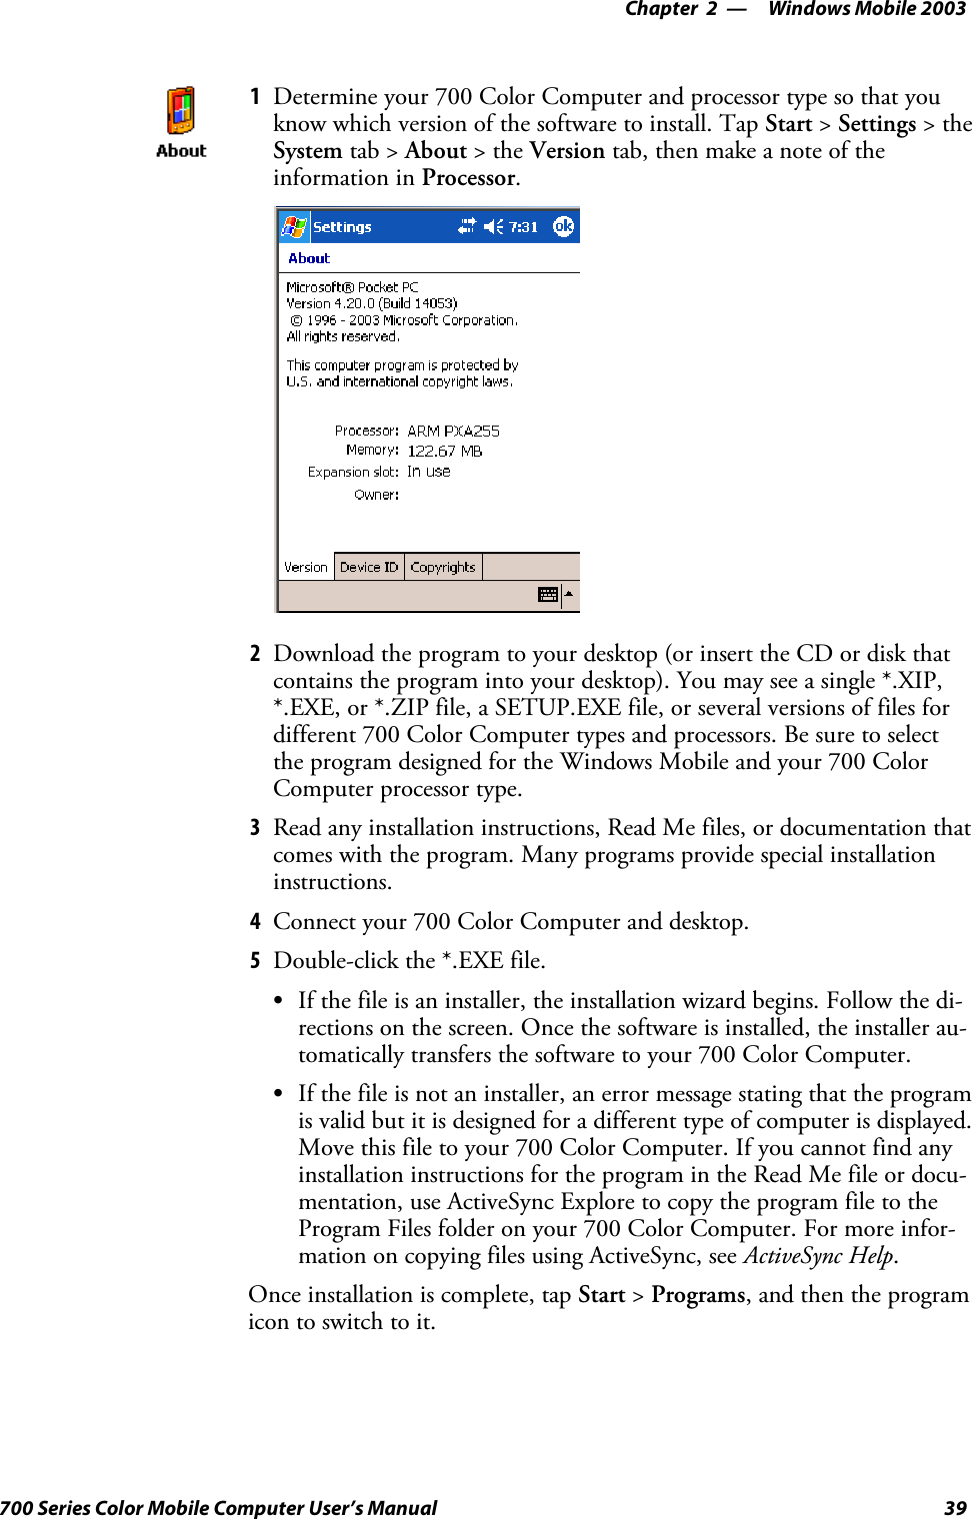 Windows Mobile 2003—Chapter 239700 Series Color Mobile Computer User’s Manual1Determine your 700 Color Computer and processor type so that youknow which version of the software to install. Tap Start &gt;Settings &gt;theSystem tab &gt; About &gt;theVersion tab, then make a note of theinformation in Processor.2Download the program to your desktop (or insert the CD or disk thatcontains the program into your desktop). You may see a single *.XIP,*.EXE, or *.ZIP file, a SETUP.EXE file, or several versions of files fordifferent 700 Color Computer types and processors. Be sure to selectthe program designed for the Windows Mobile and your 700 ColorComputer processor type.3Read any installation instructions, Read Me files, or documentation thatcomes with the program. Many programs provide special installationinstructions.4Connect your 700 Color Computer and desktop.5Double-click the *.EXE file.SIf the file is an installer, the installation wizard begins. Follow the di-rections on the screen. Once the software is installed, the installer au-tomatically transfers the software to your 700 Color Computer.SIf the file is not an installer, an error message stating that the programis valid but it is designed for a different type of computer is displayed.Move this file to your 700 Color Computer. If you cannot find anyinstallation instructions for the program in the Read Me file or docu-mentation, use ActiveSync Explore to copy the program file to theProgram Files folder on your 700 Color Computer. For more infor-mation on copying files using ActiveSync, see ActiveSync Help.Once installation is complete, tap Start &gt;Programs, and then the programicon to switch to it.